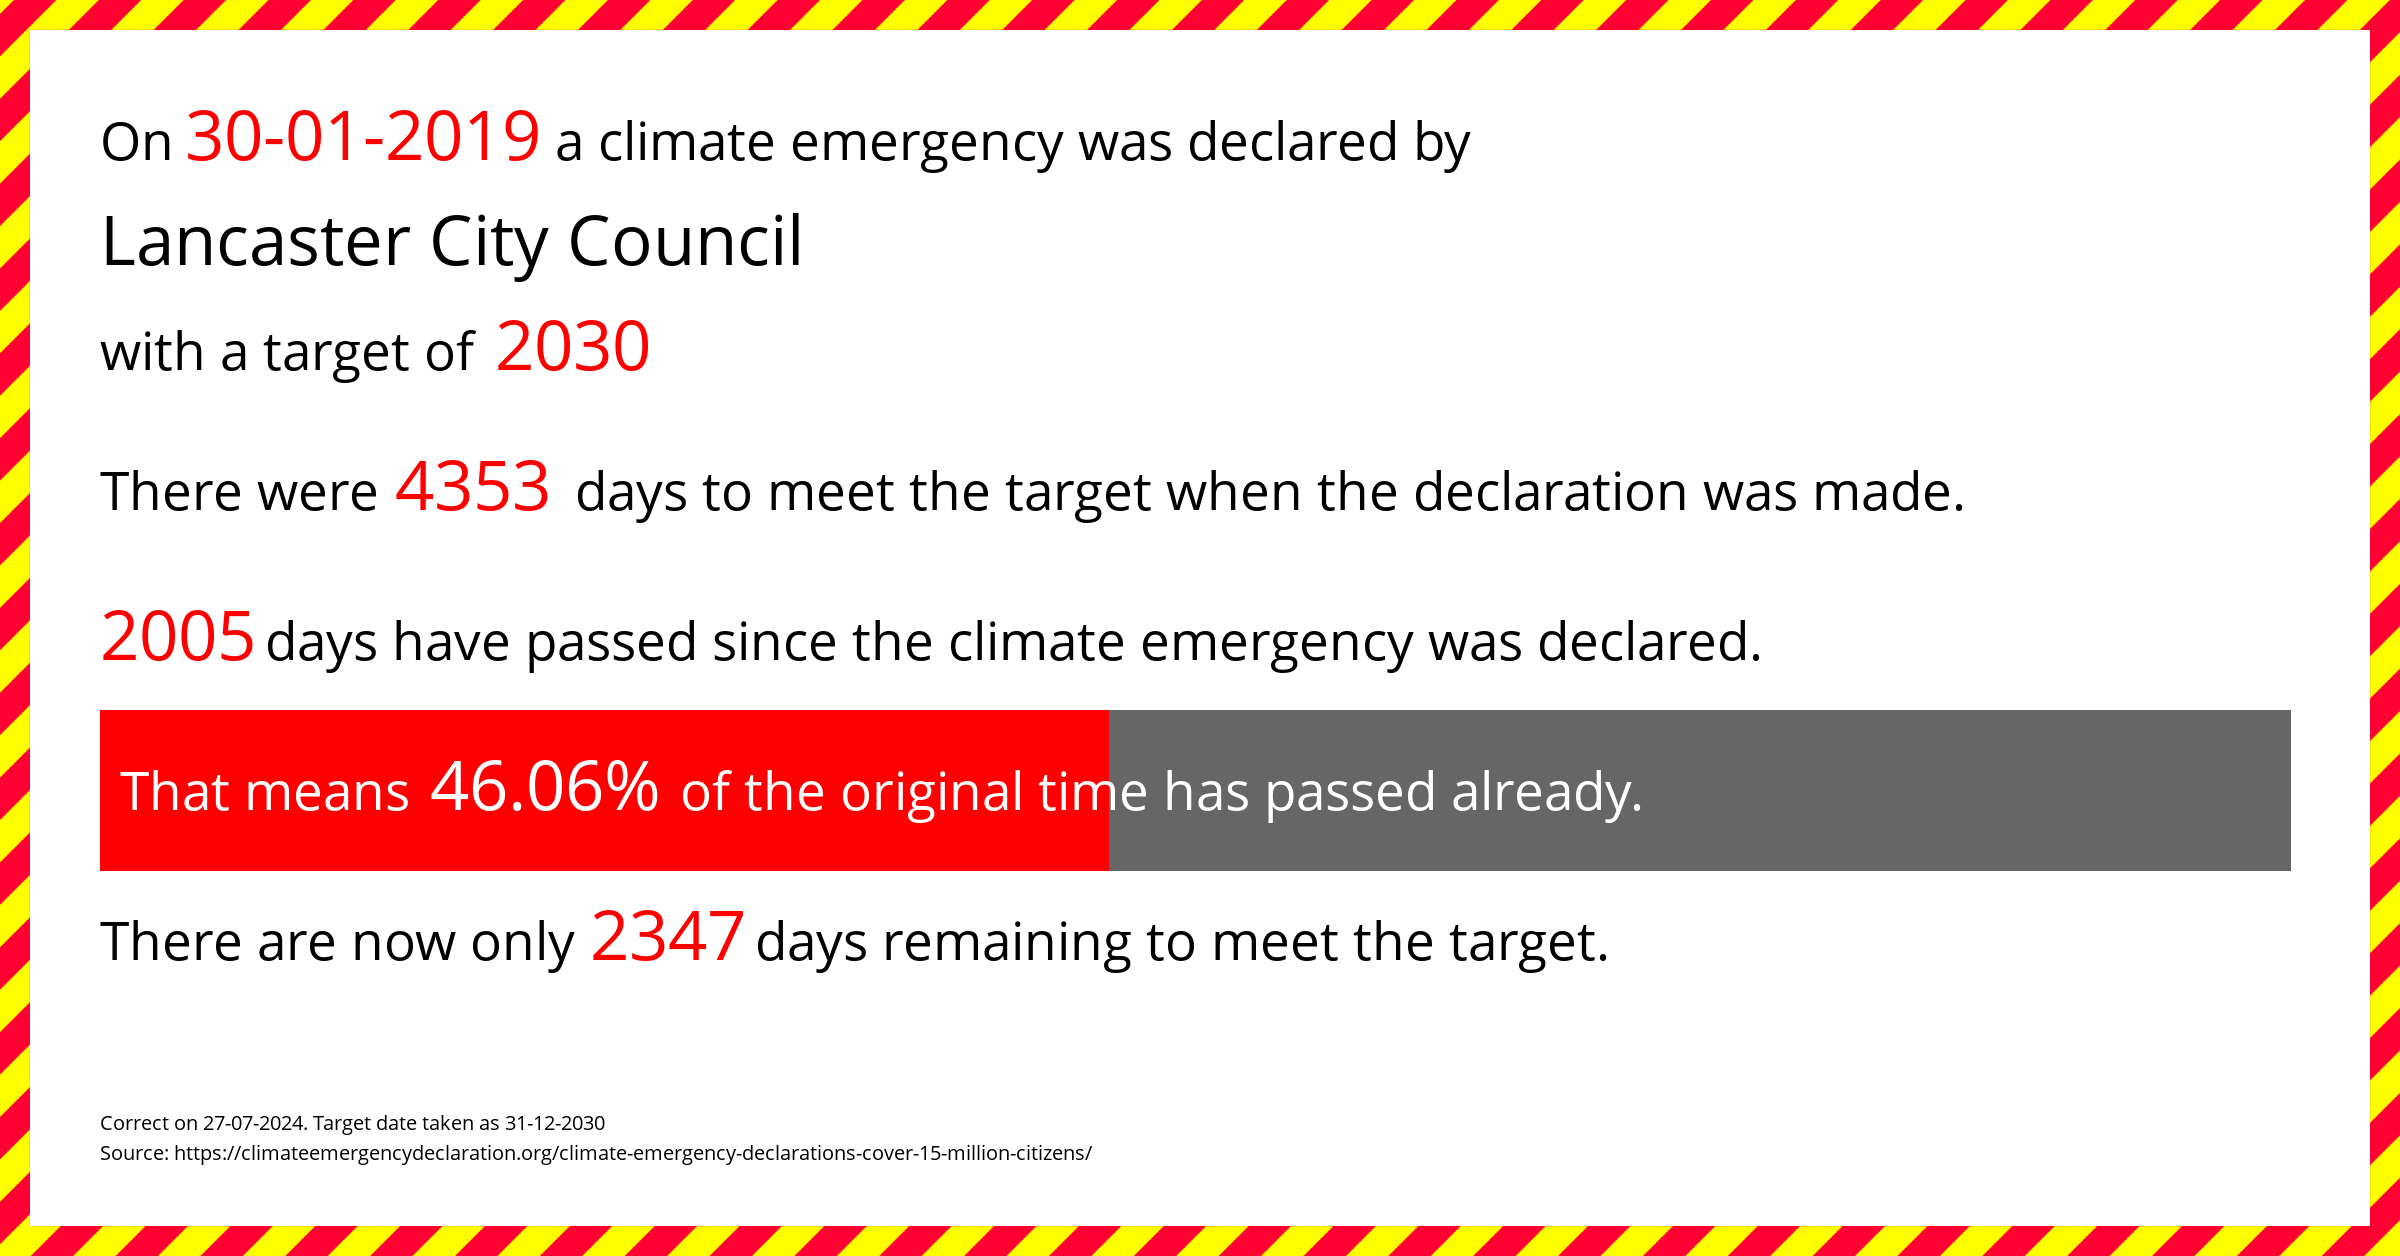 Lancaster City Council declared a Climate emergency on Wednesday 30th January 2019, with a target of 2030.